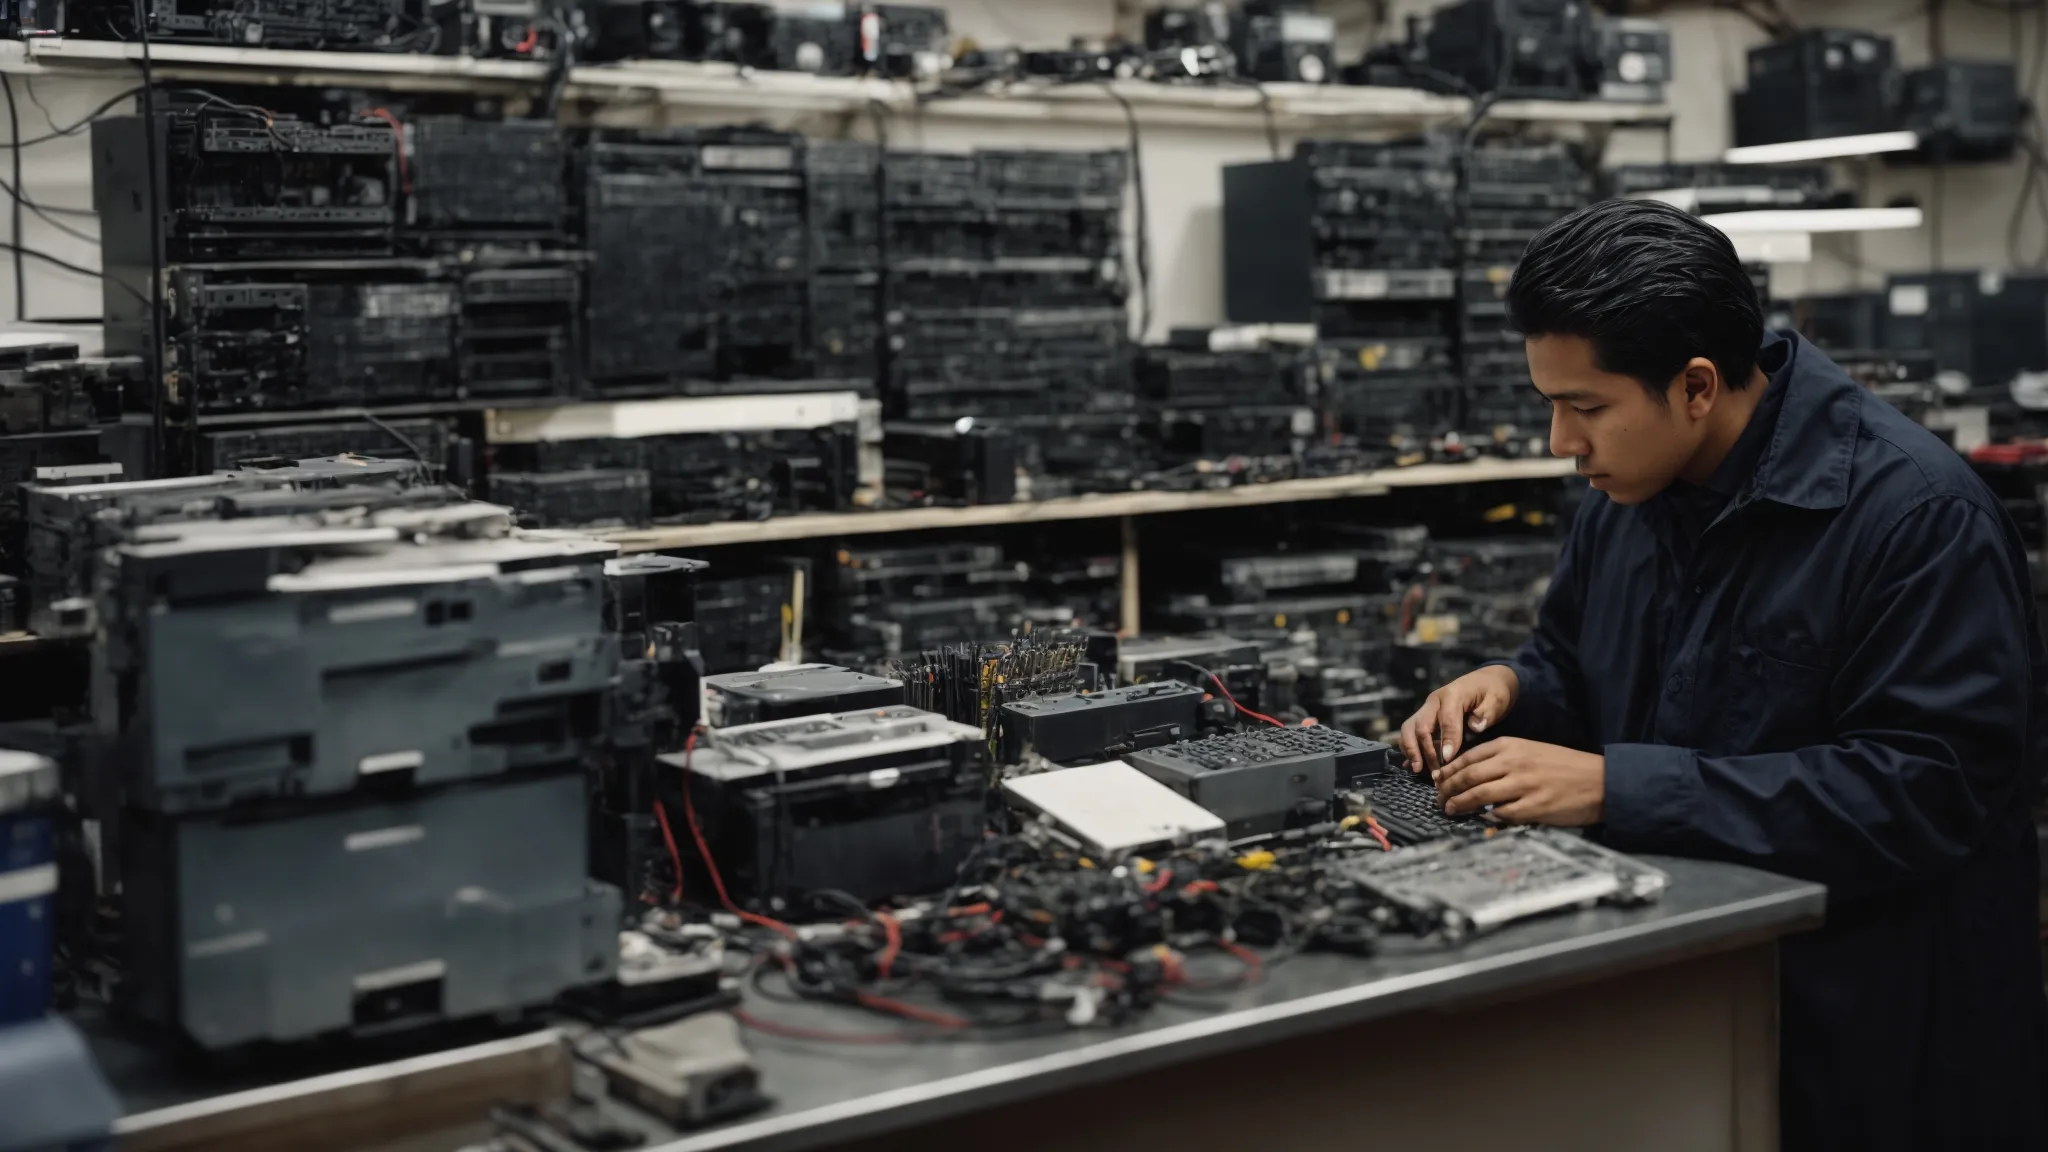 a computer technician is working diligently in a well-organized repair shop filled with various computers and electronic tools.